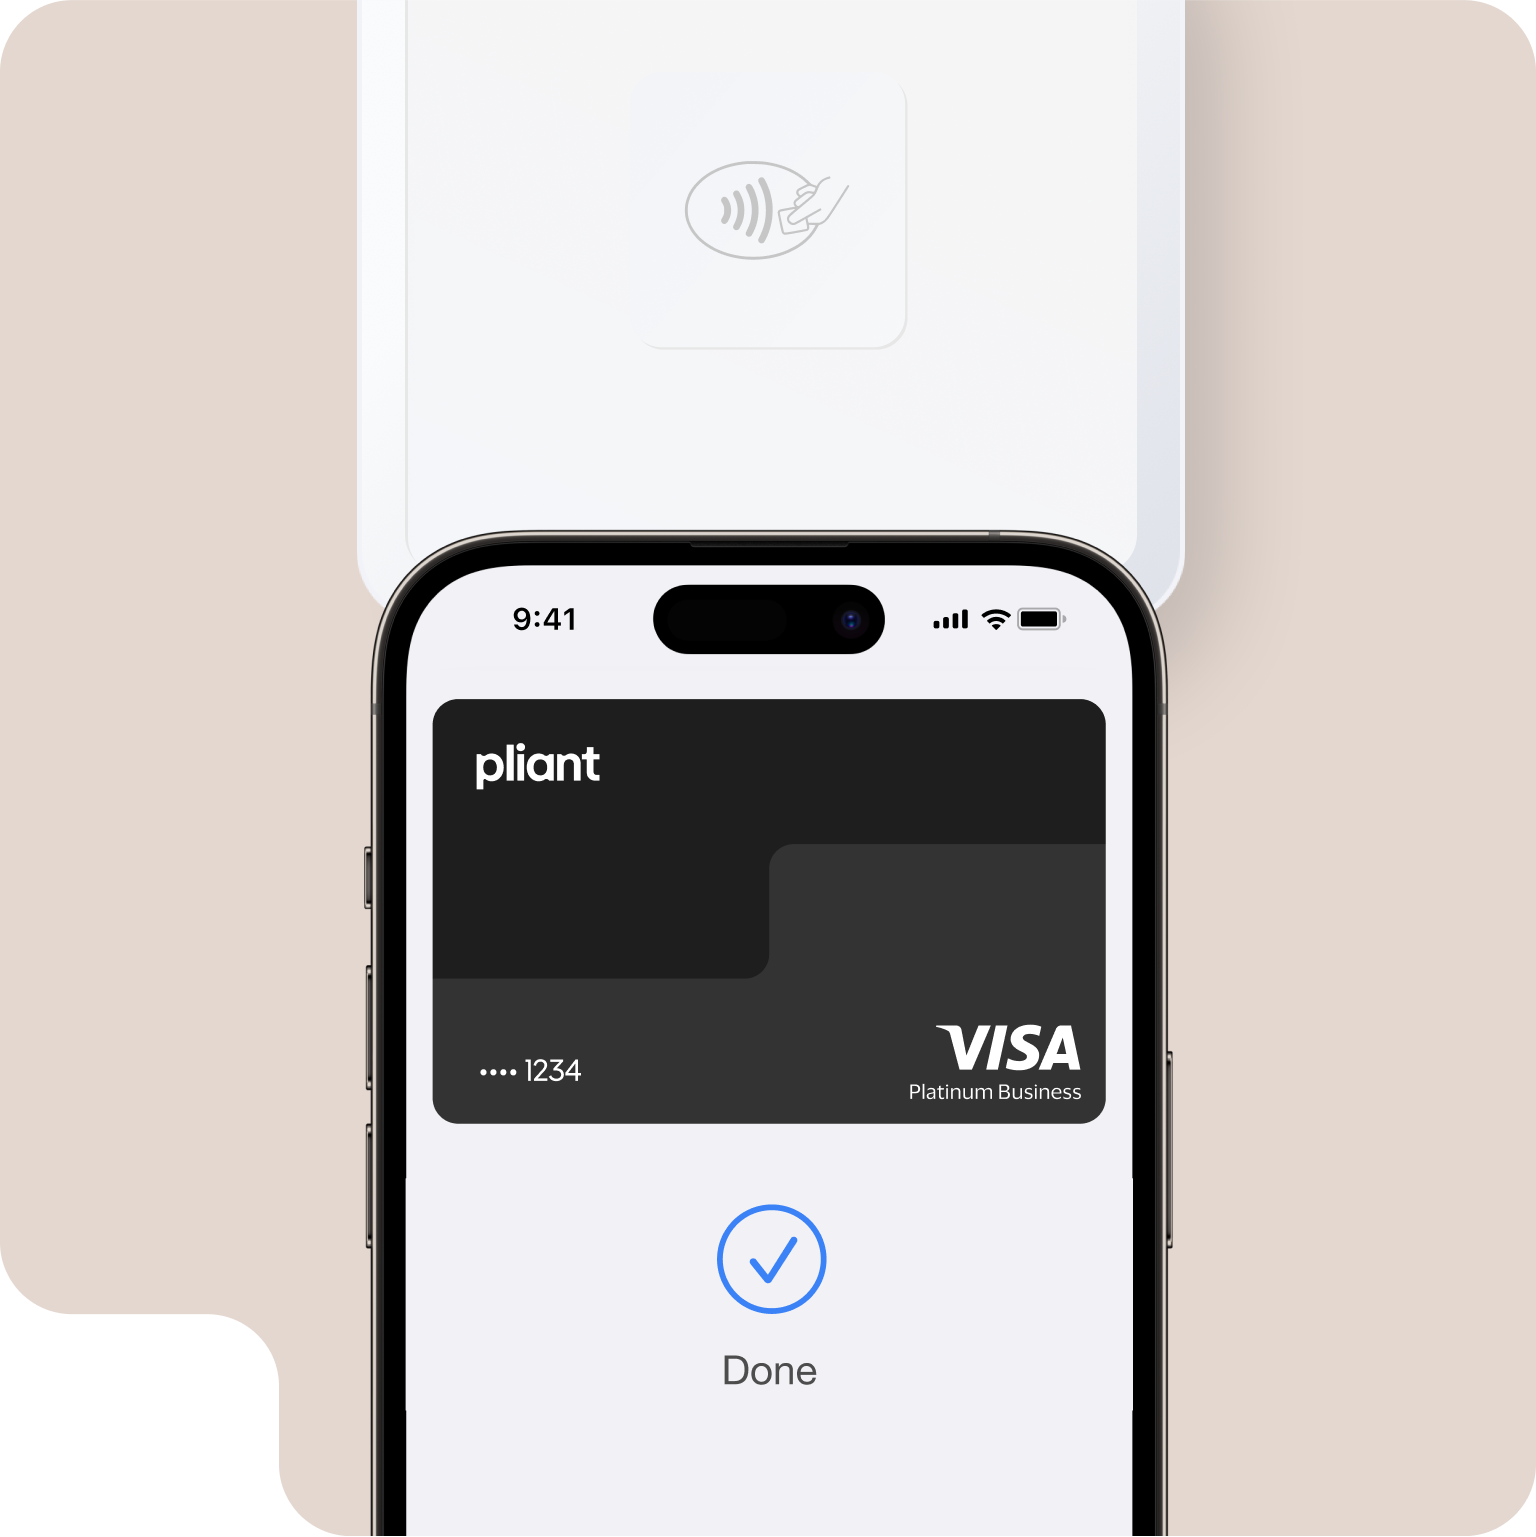 Pliant credit cards work on mobile